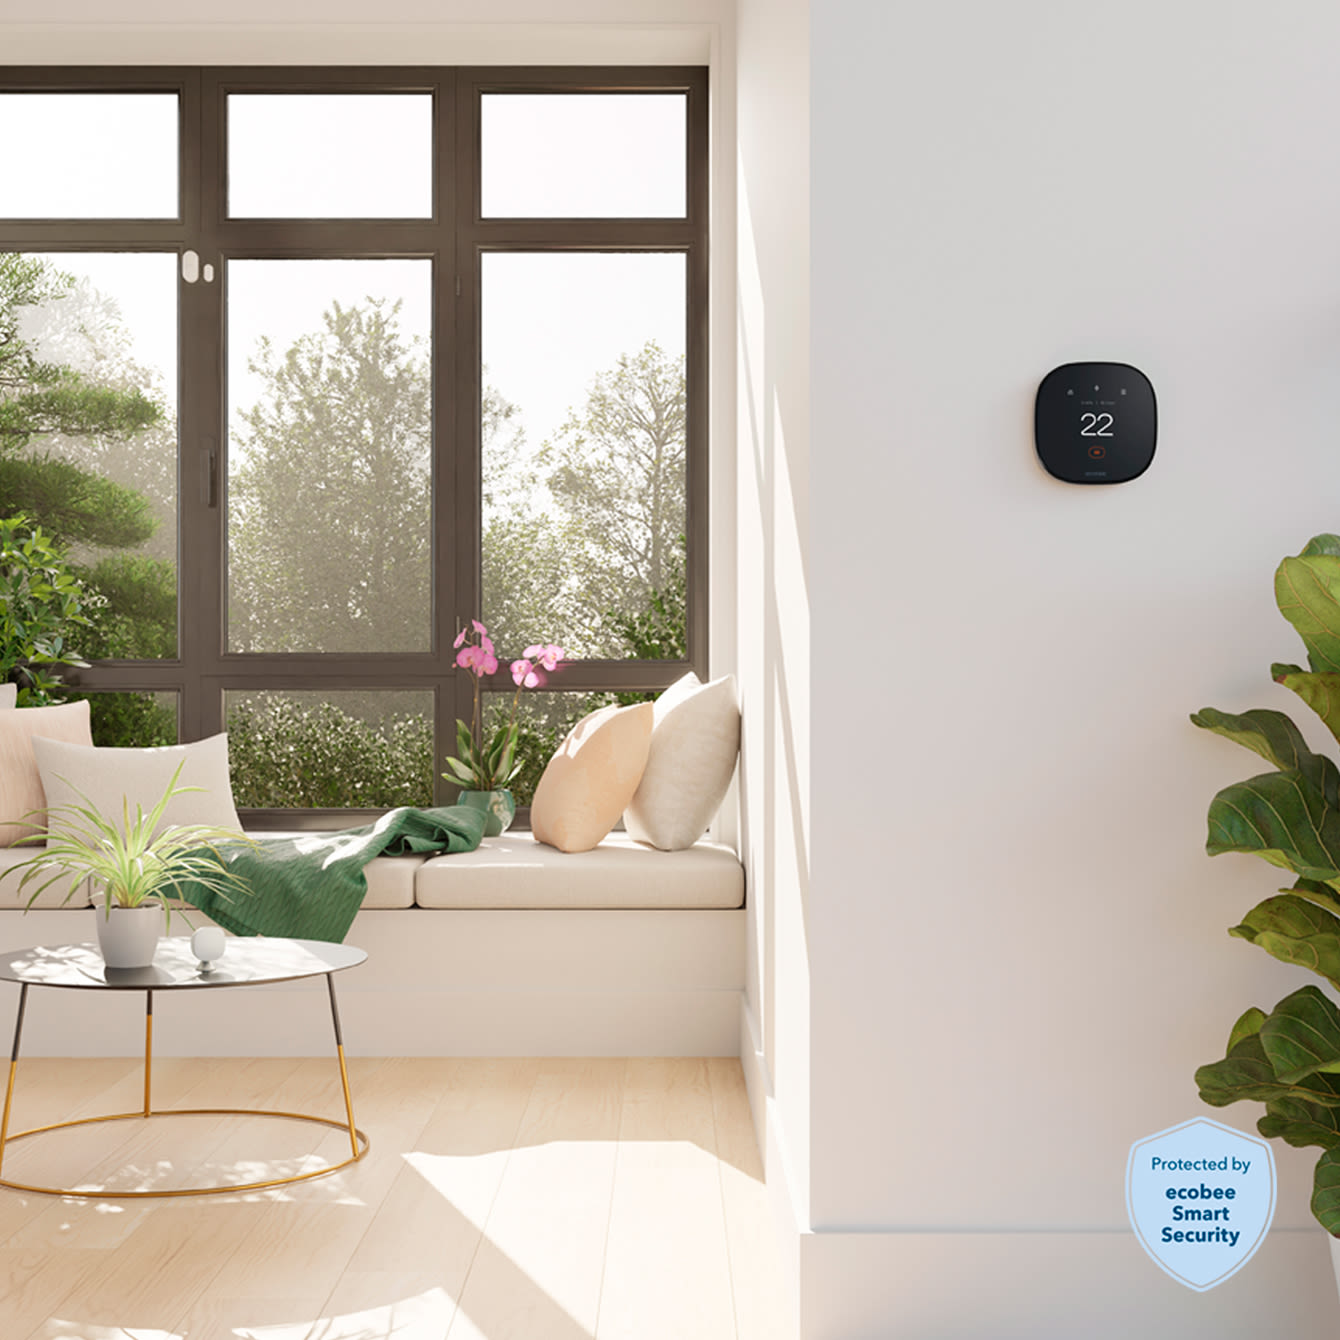 ecobee thermostat on a wall in a living room